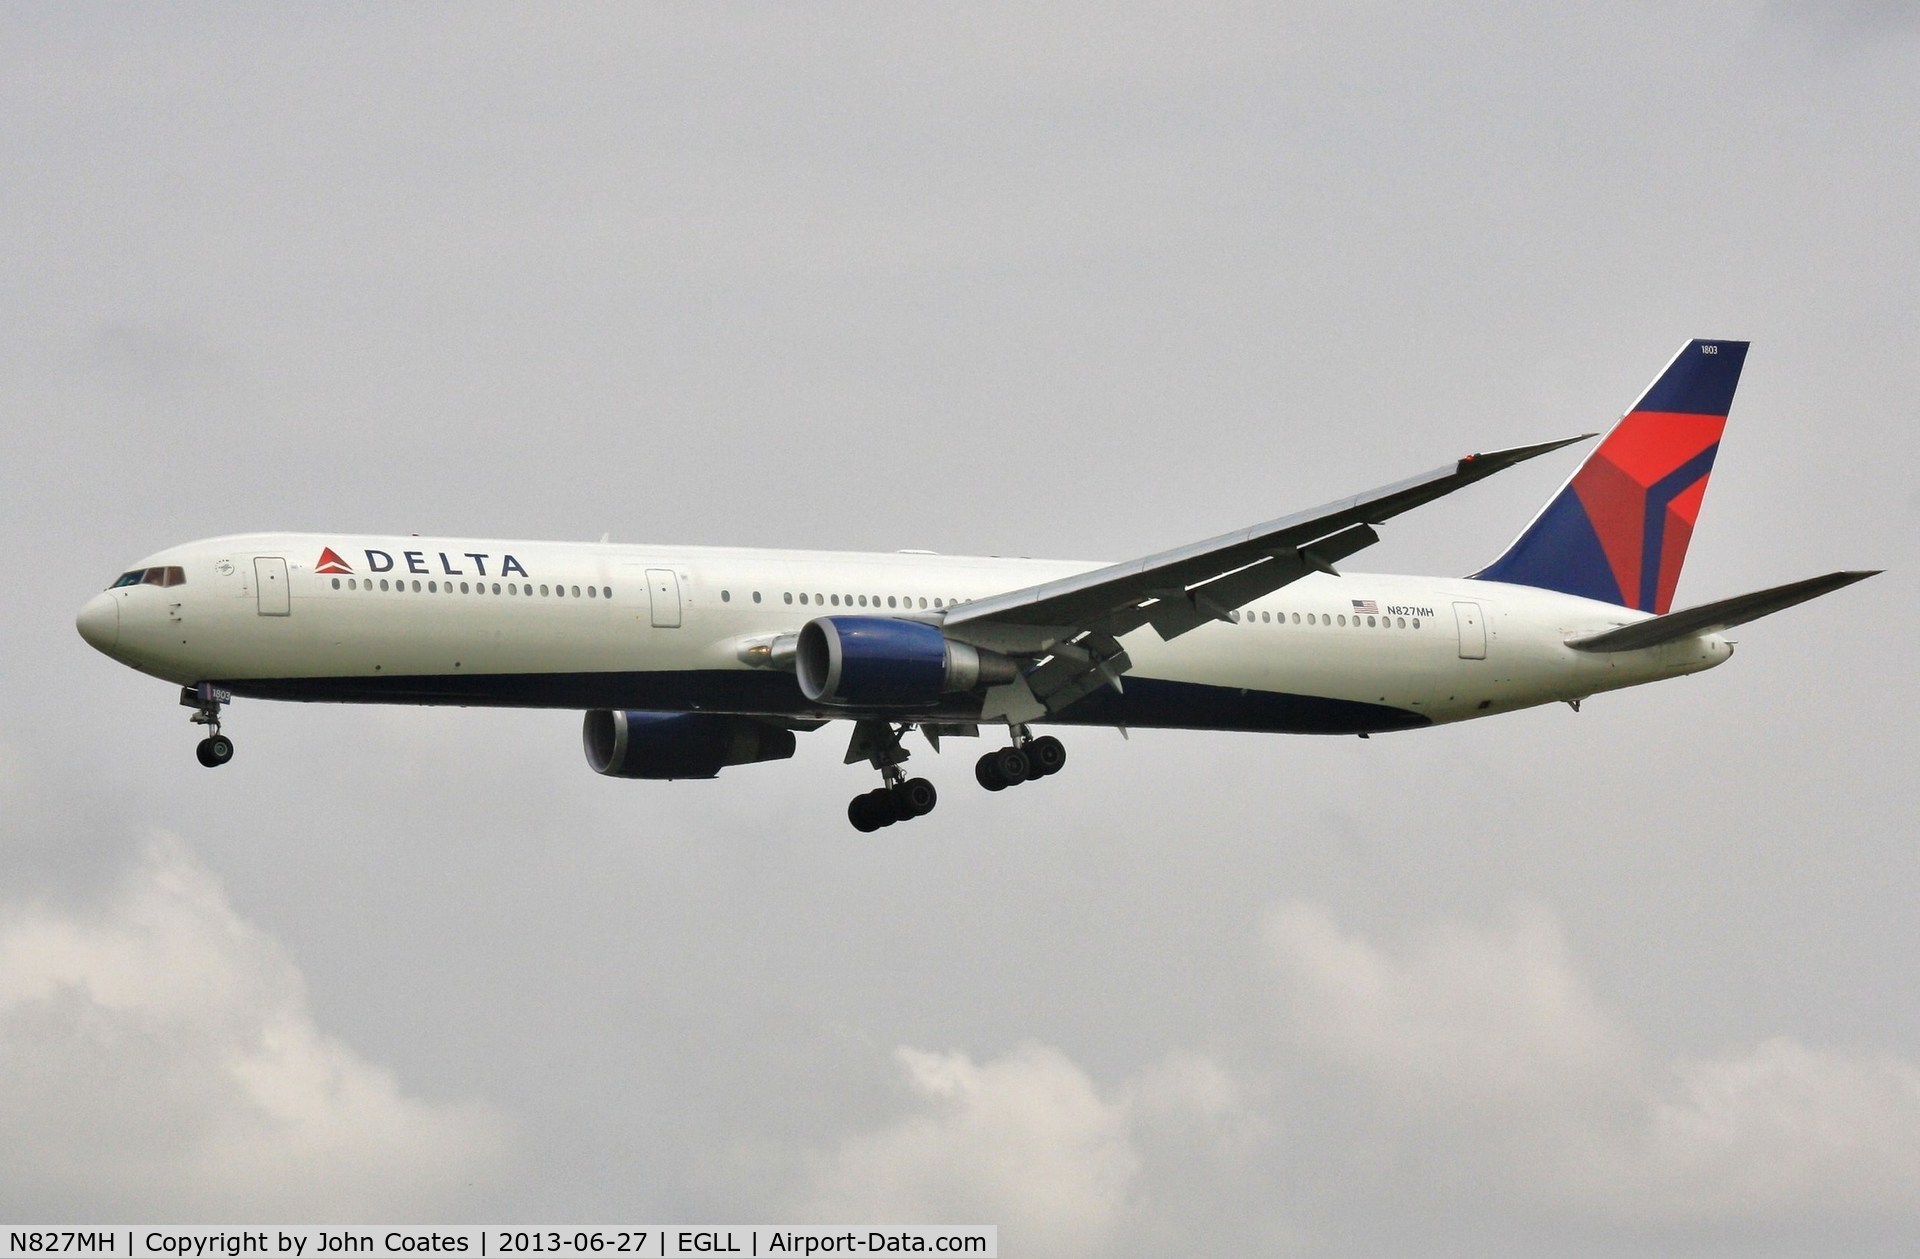 N827MH, 2001 Boeing 767-432/ER C/N 29705, On approach to 27L